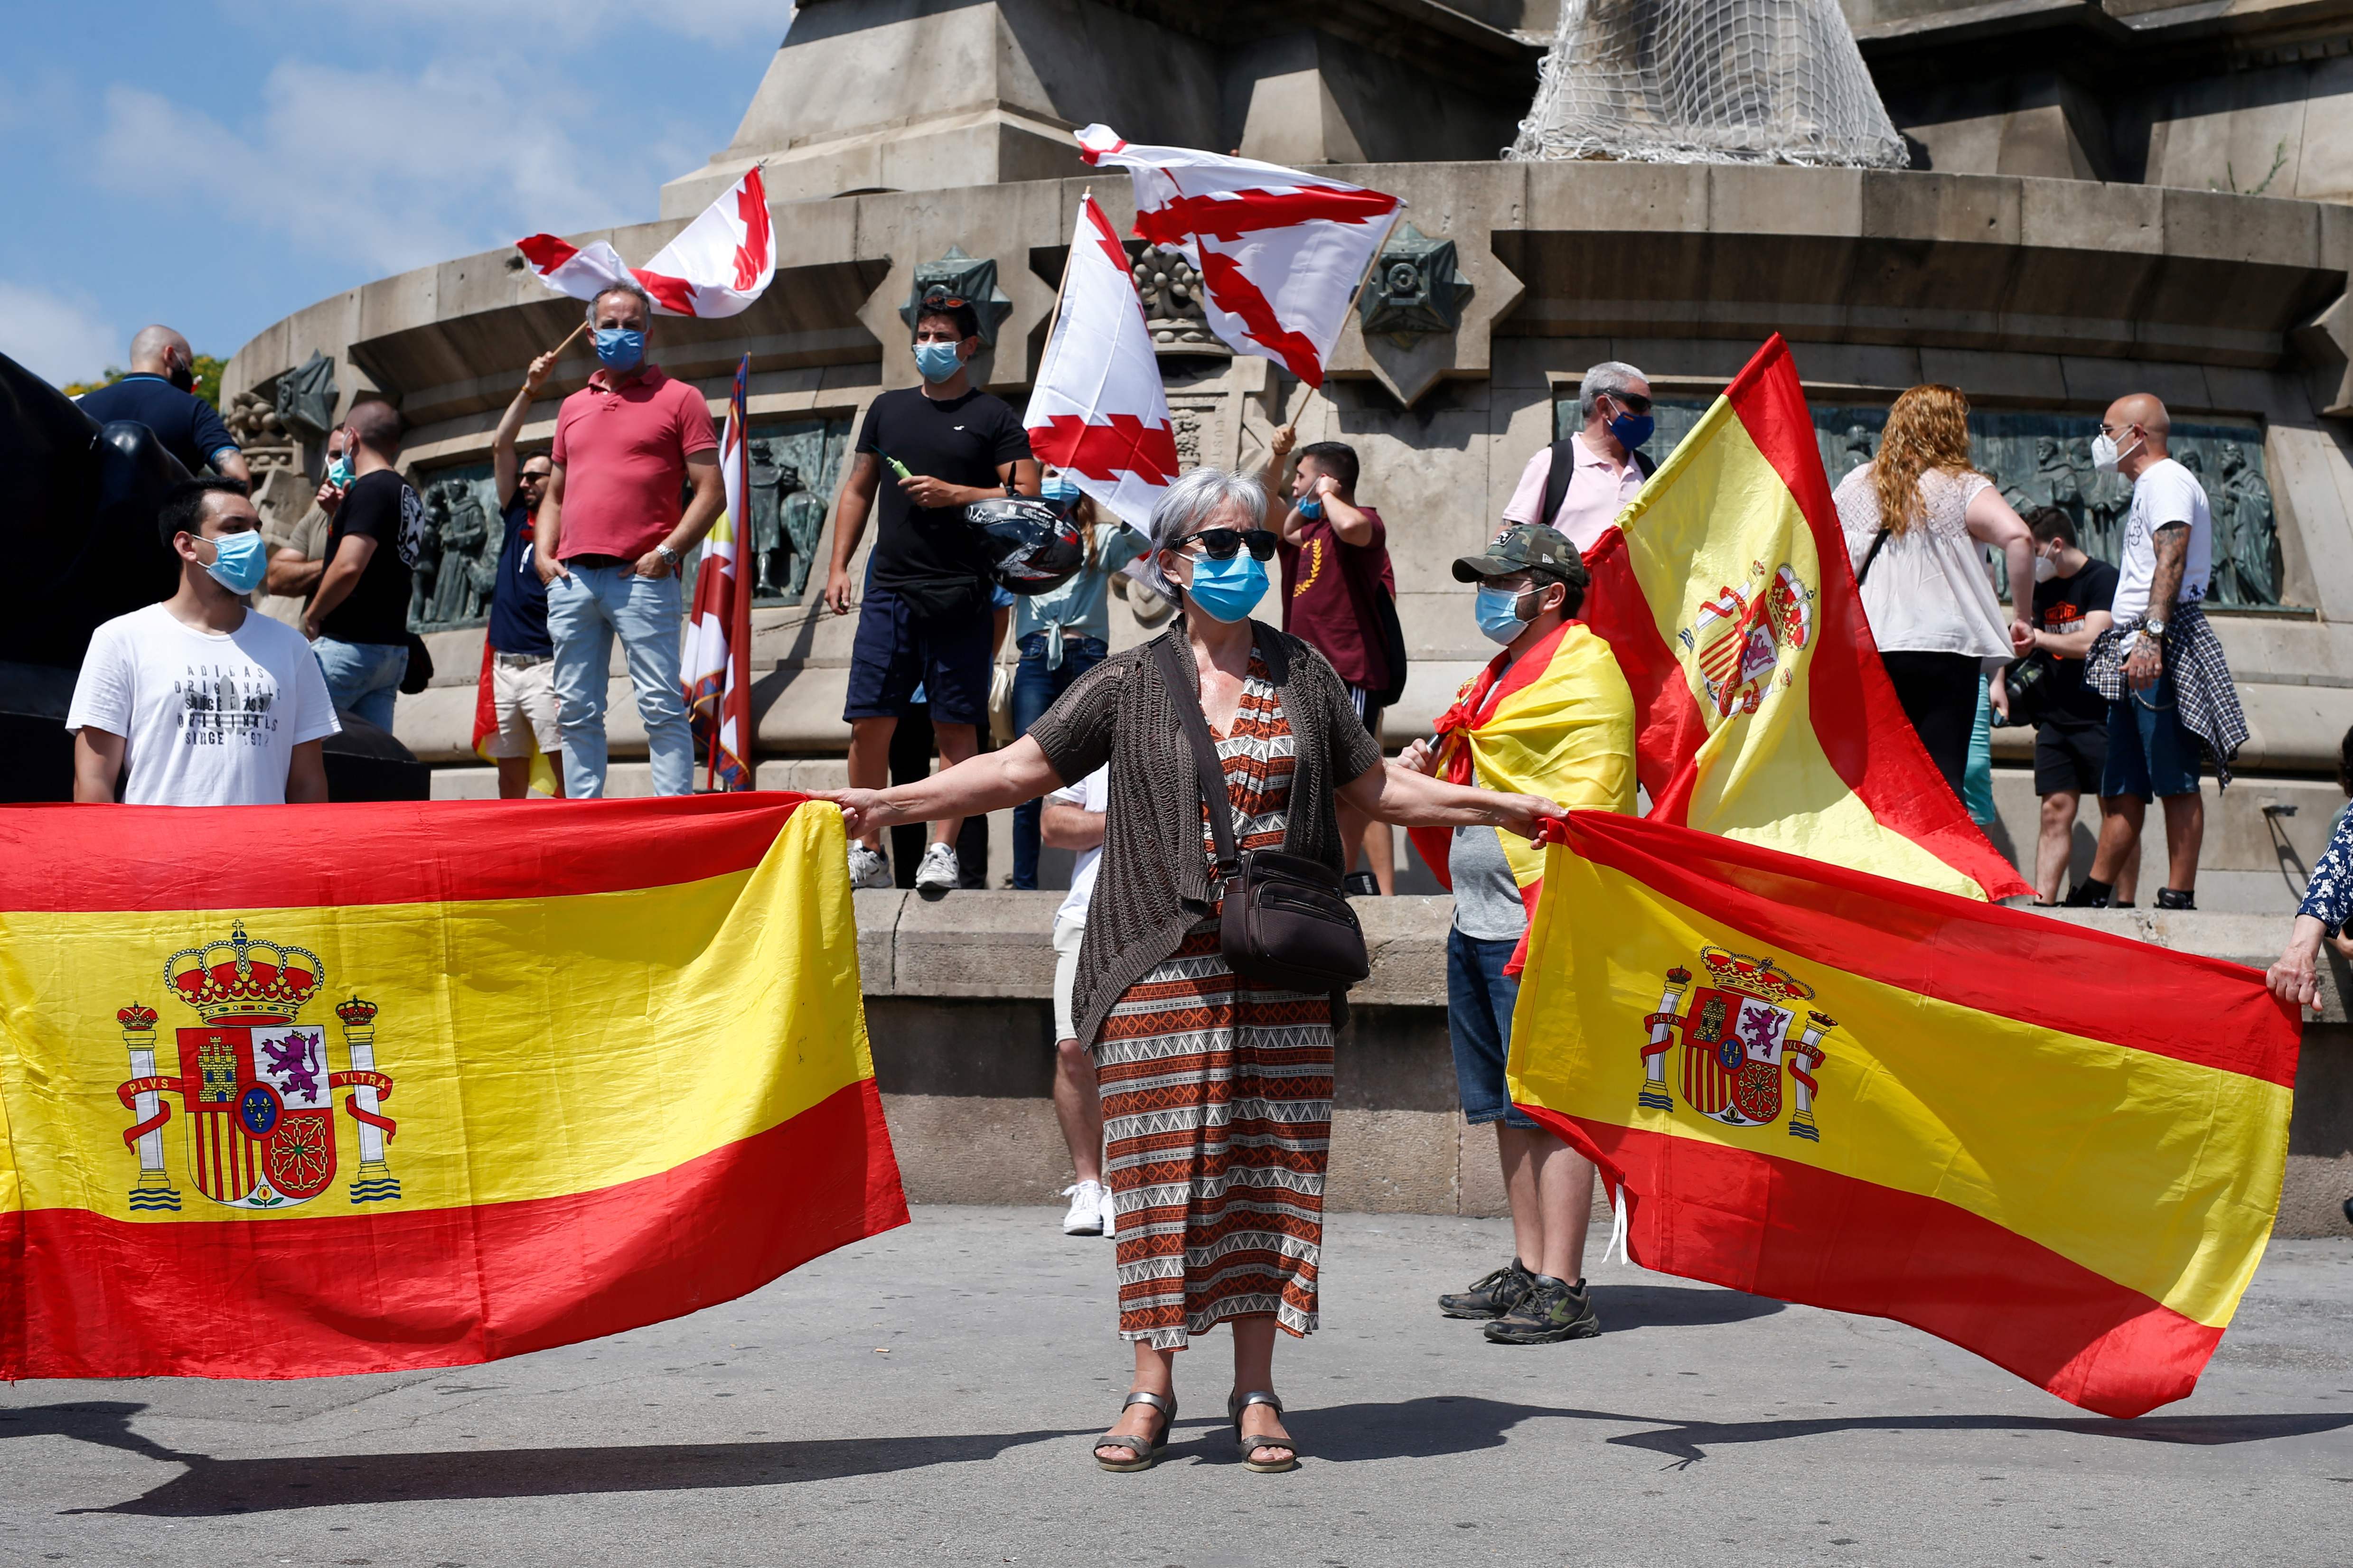 Protesters hold Spanish national flags and Cross of Burgundy flags during a demonstration by Spain's far-Right Vox party to preserve a statue of Christopher Columbus